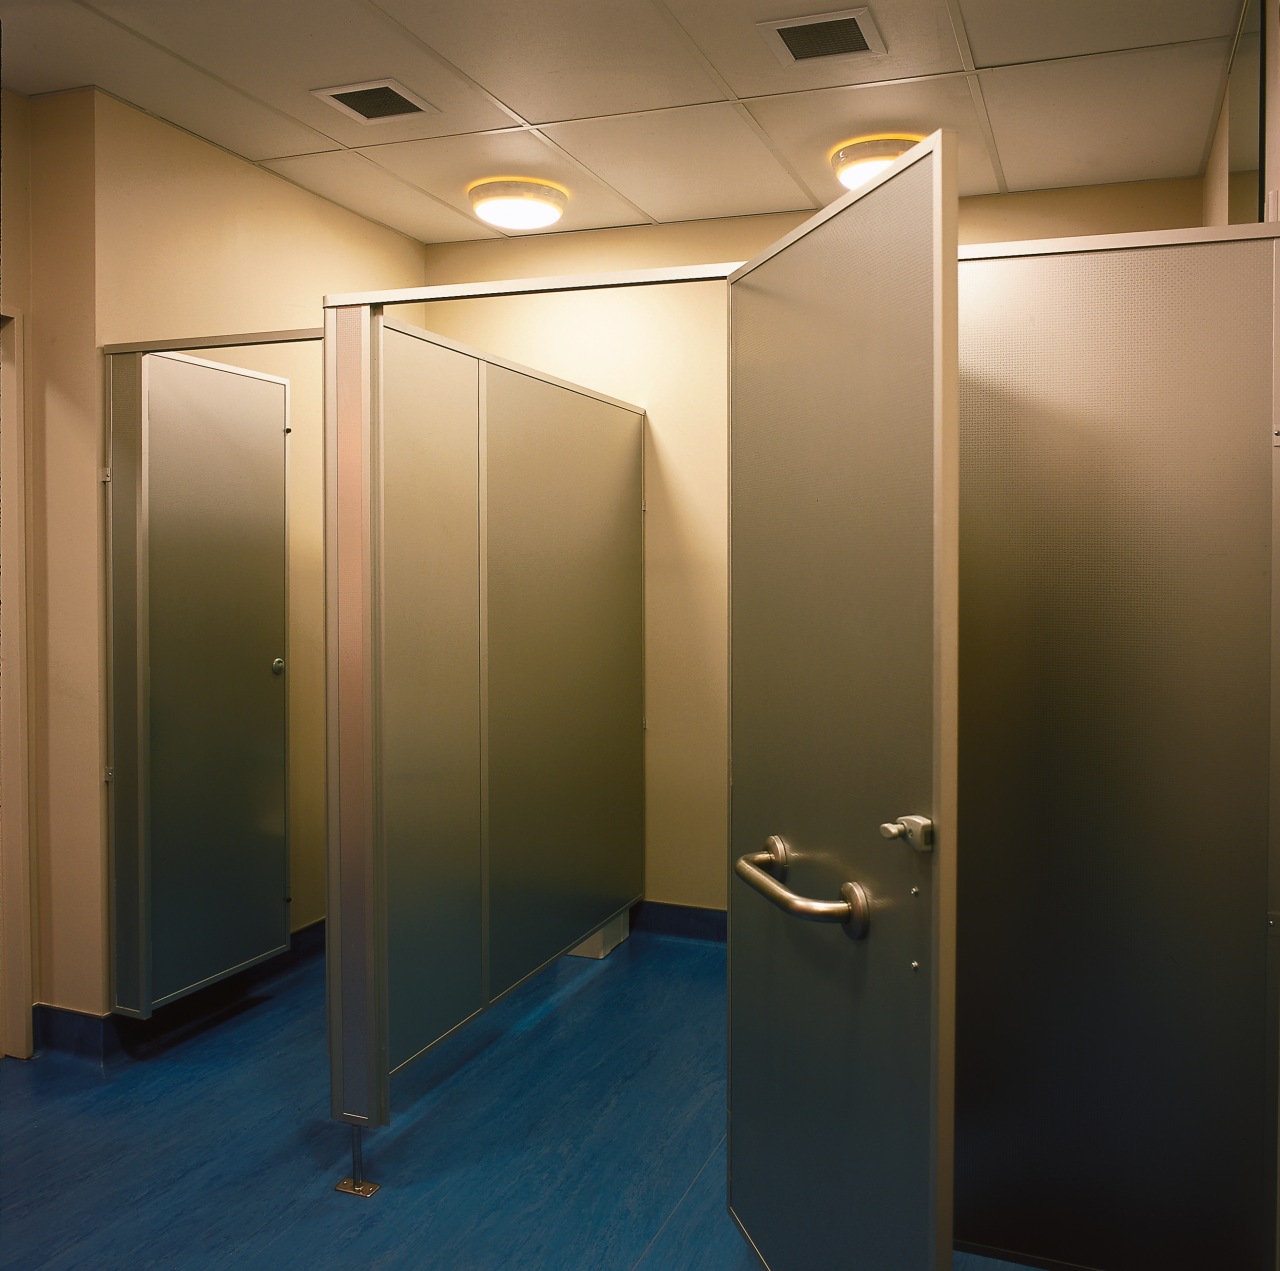 Office toilet facilities with aluminium partitions. ceiling, floor, glass, interior design, lighting, public toilet, room, toilet, wall, brown